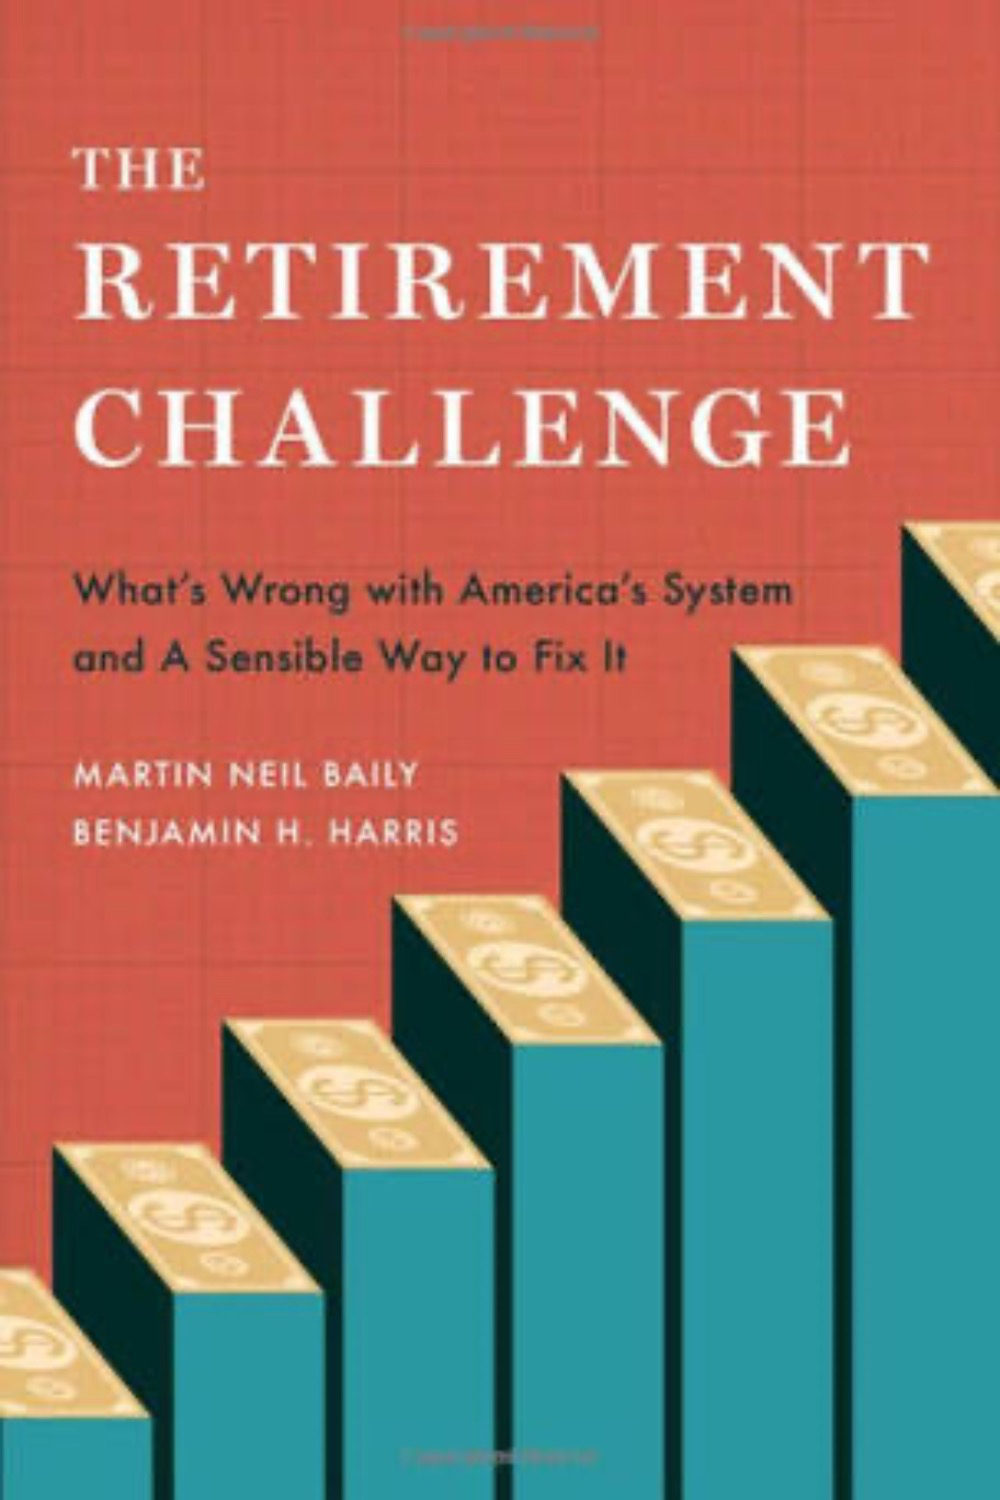 The Retirement Challenge: What's Wrong with America's System and A Sensible Way to Fix It by Martin Neil Baily and Benjamin H. Harris